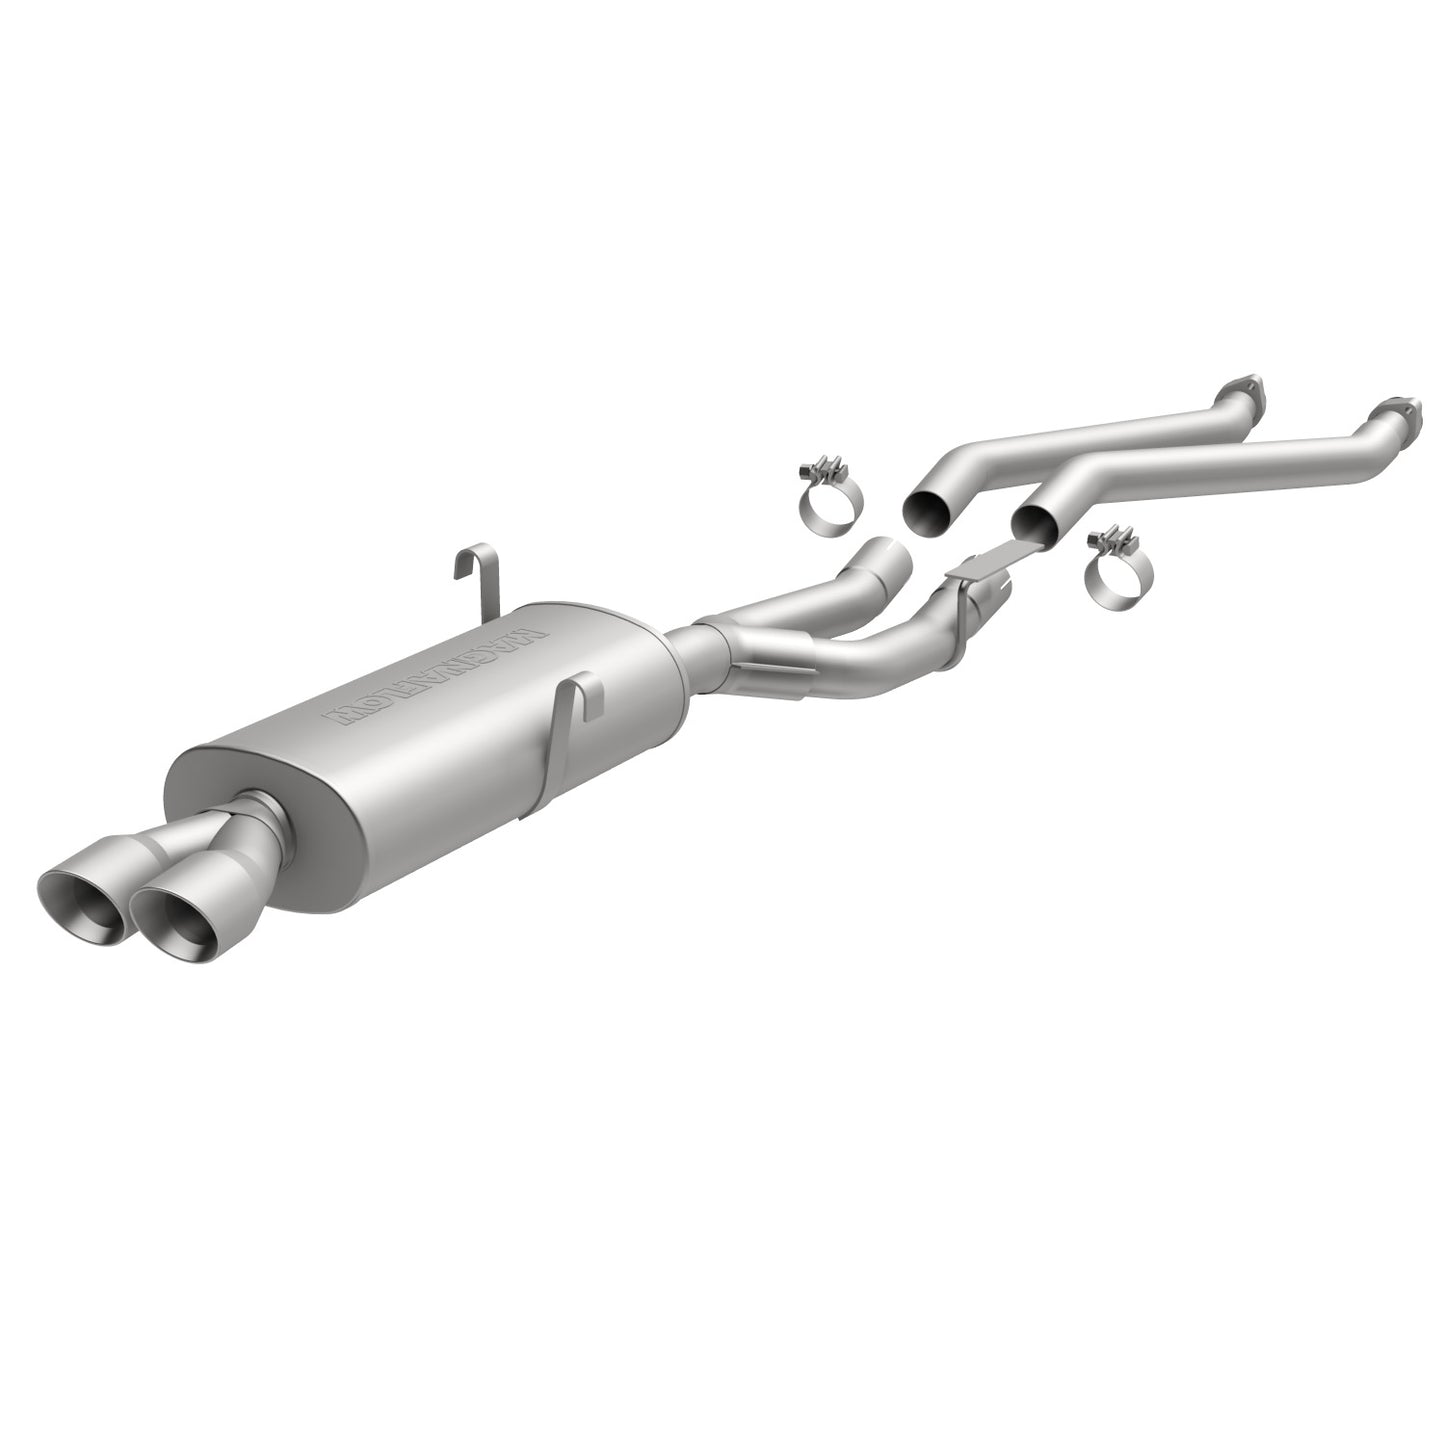 MagnaFlow Touring Series Cat-Back Performance Exhaust System 16535